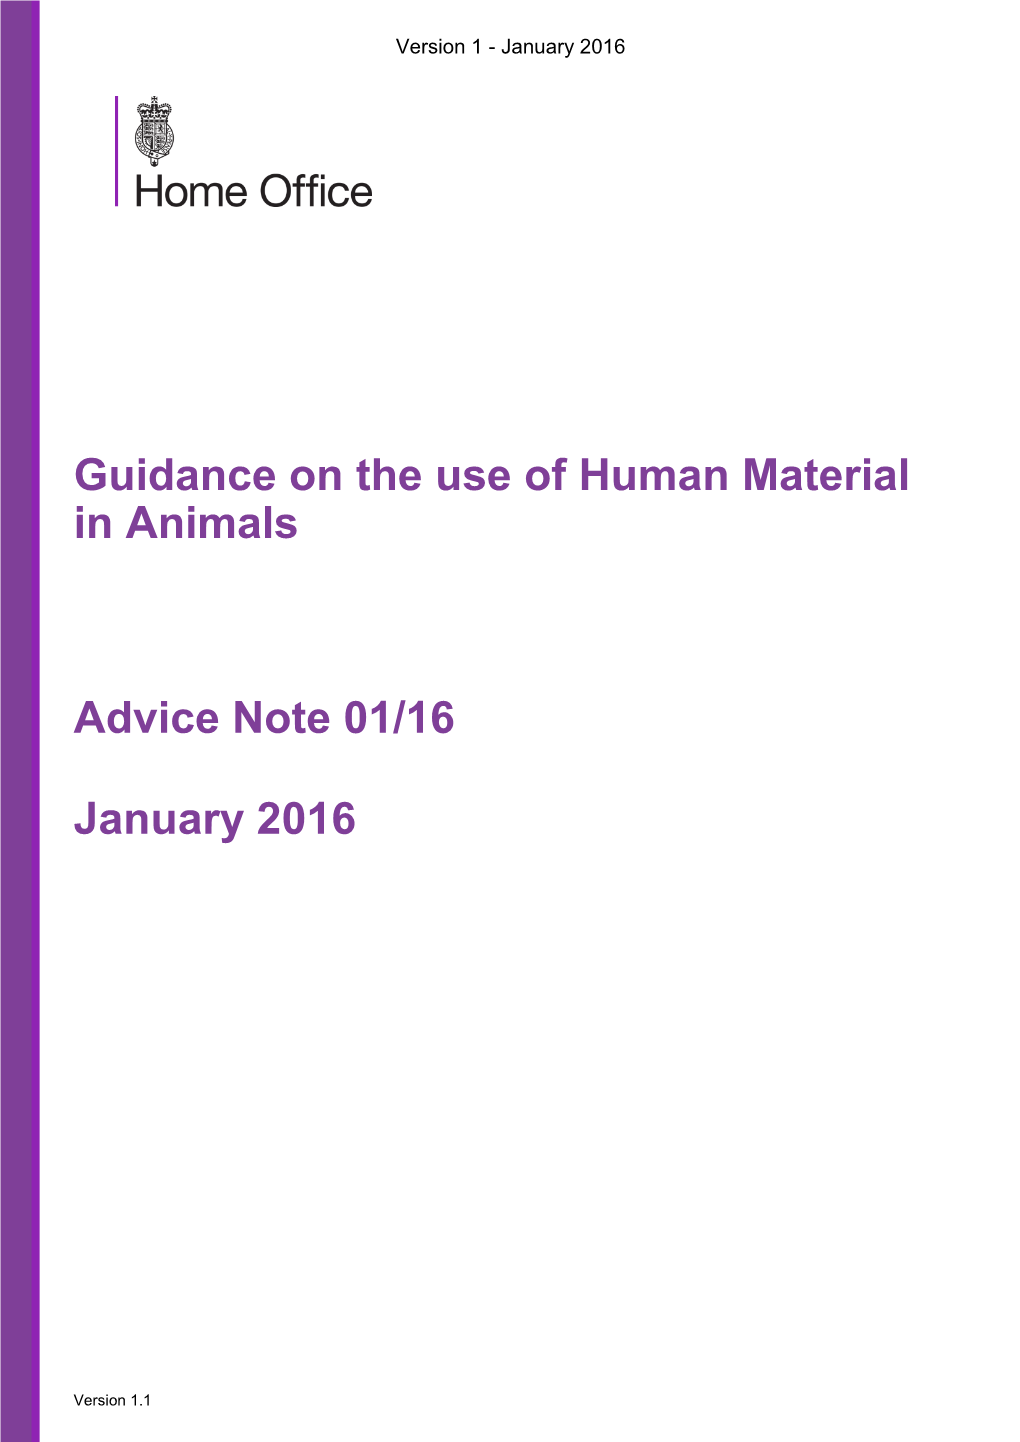 Guidance on the Use of Human Material in Animals